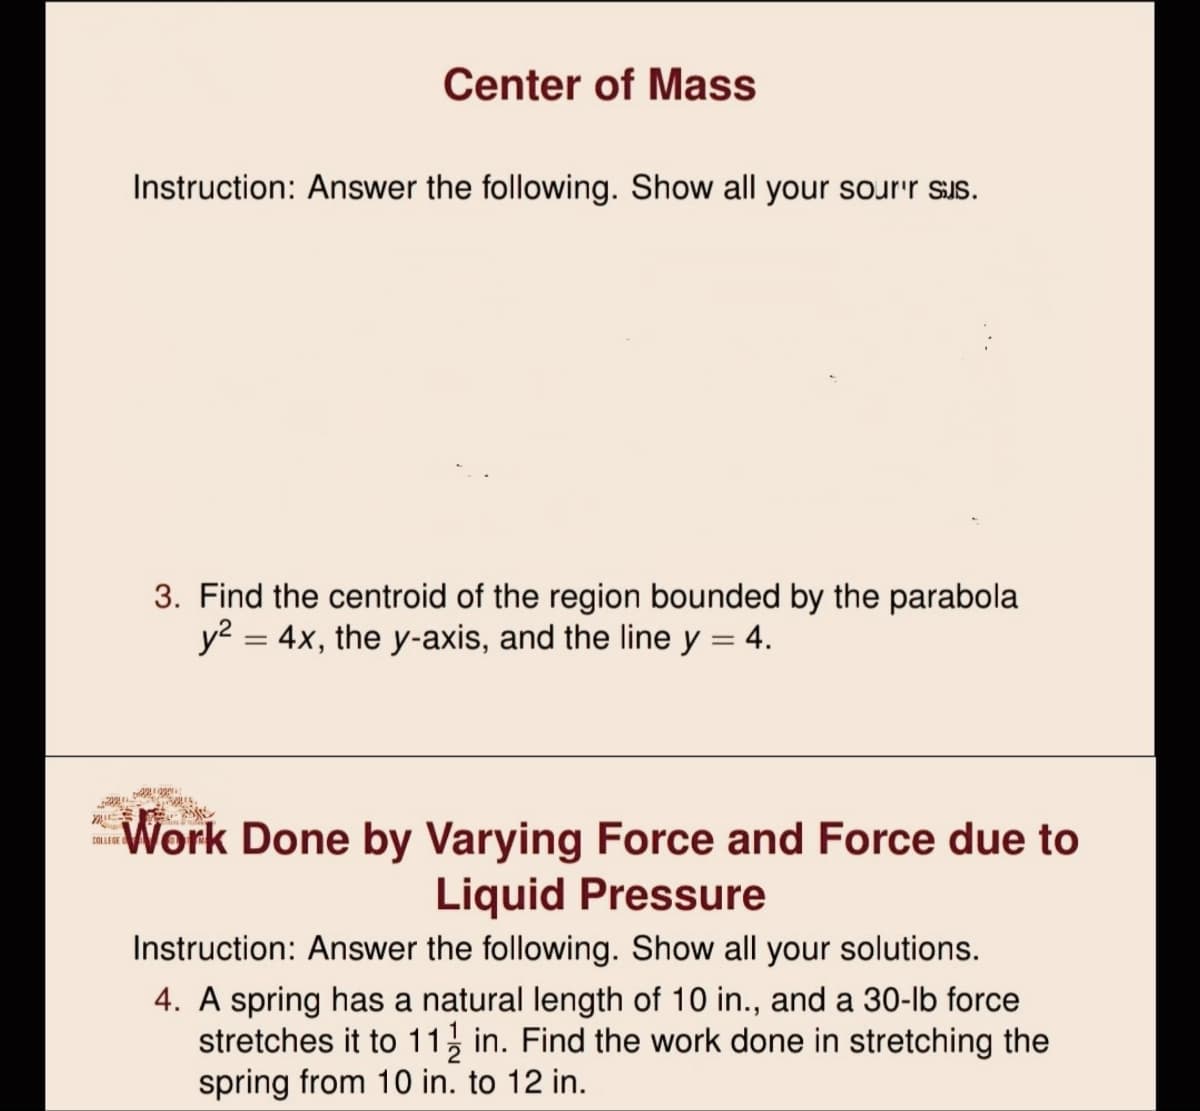 Center of Mass
Instruction: Answer the following. Show all your sour'r sus.
3. Find the centroid of the region bounded by the parabola
y? = 4x, the y-axis, and the line y = 4.
%3D
%3D
Work Done by Varying Force and Force due to
Liquid Pressure
COLLEGE
Instruction: Answer the following. Show all your solutions.
4. A spring has a natural length of 10 in., and a 30-lb force
stretches it to 11, in. Find the work done in stretching the
spring from 10 in. to 12 in.
